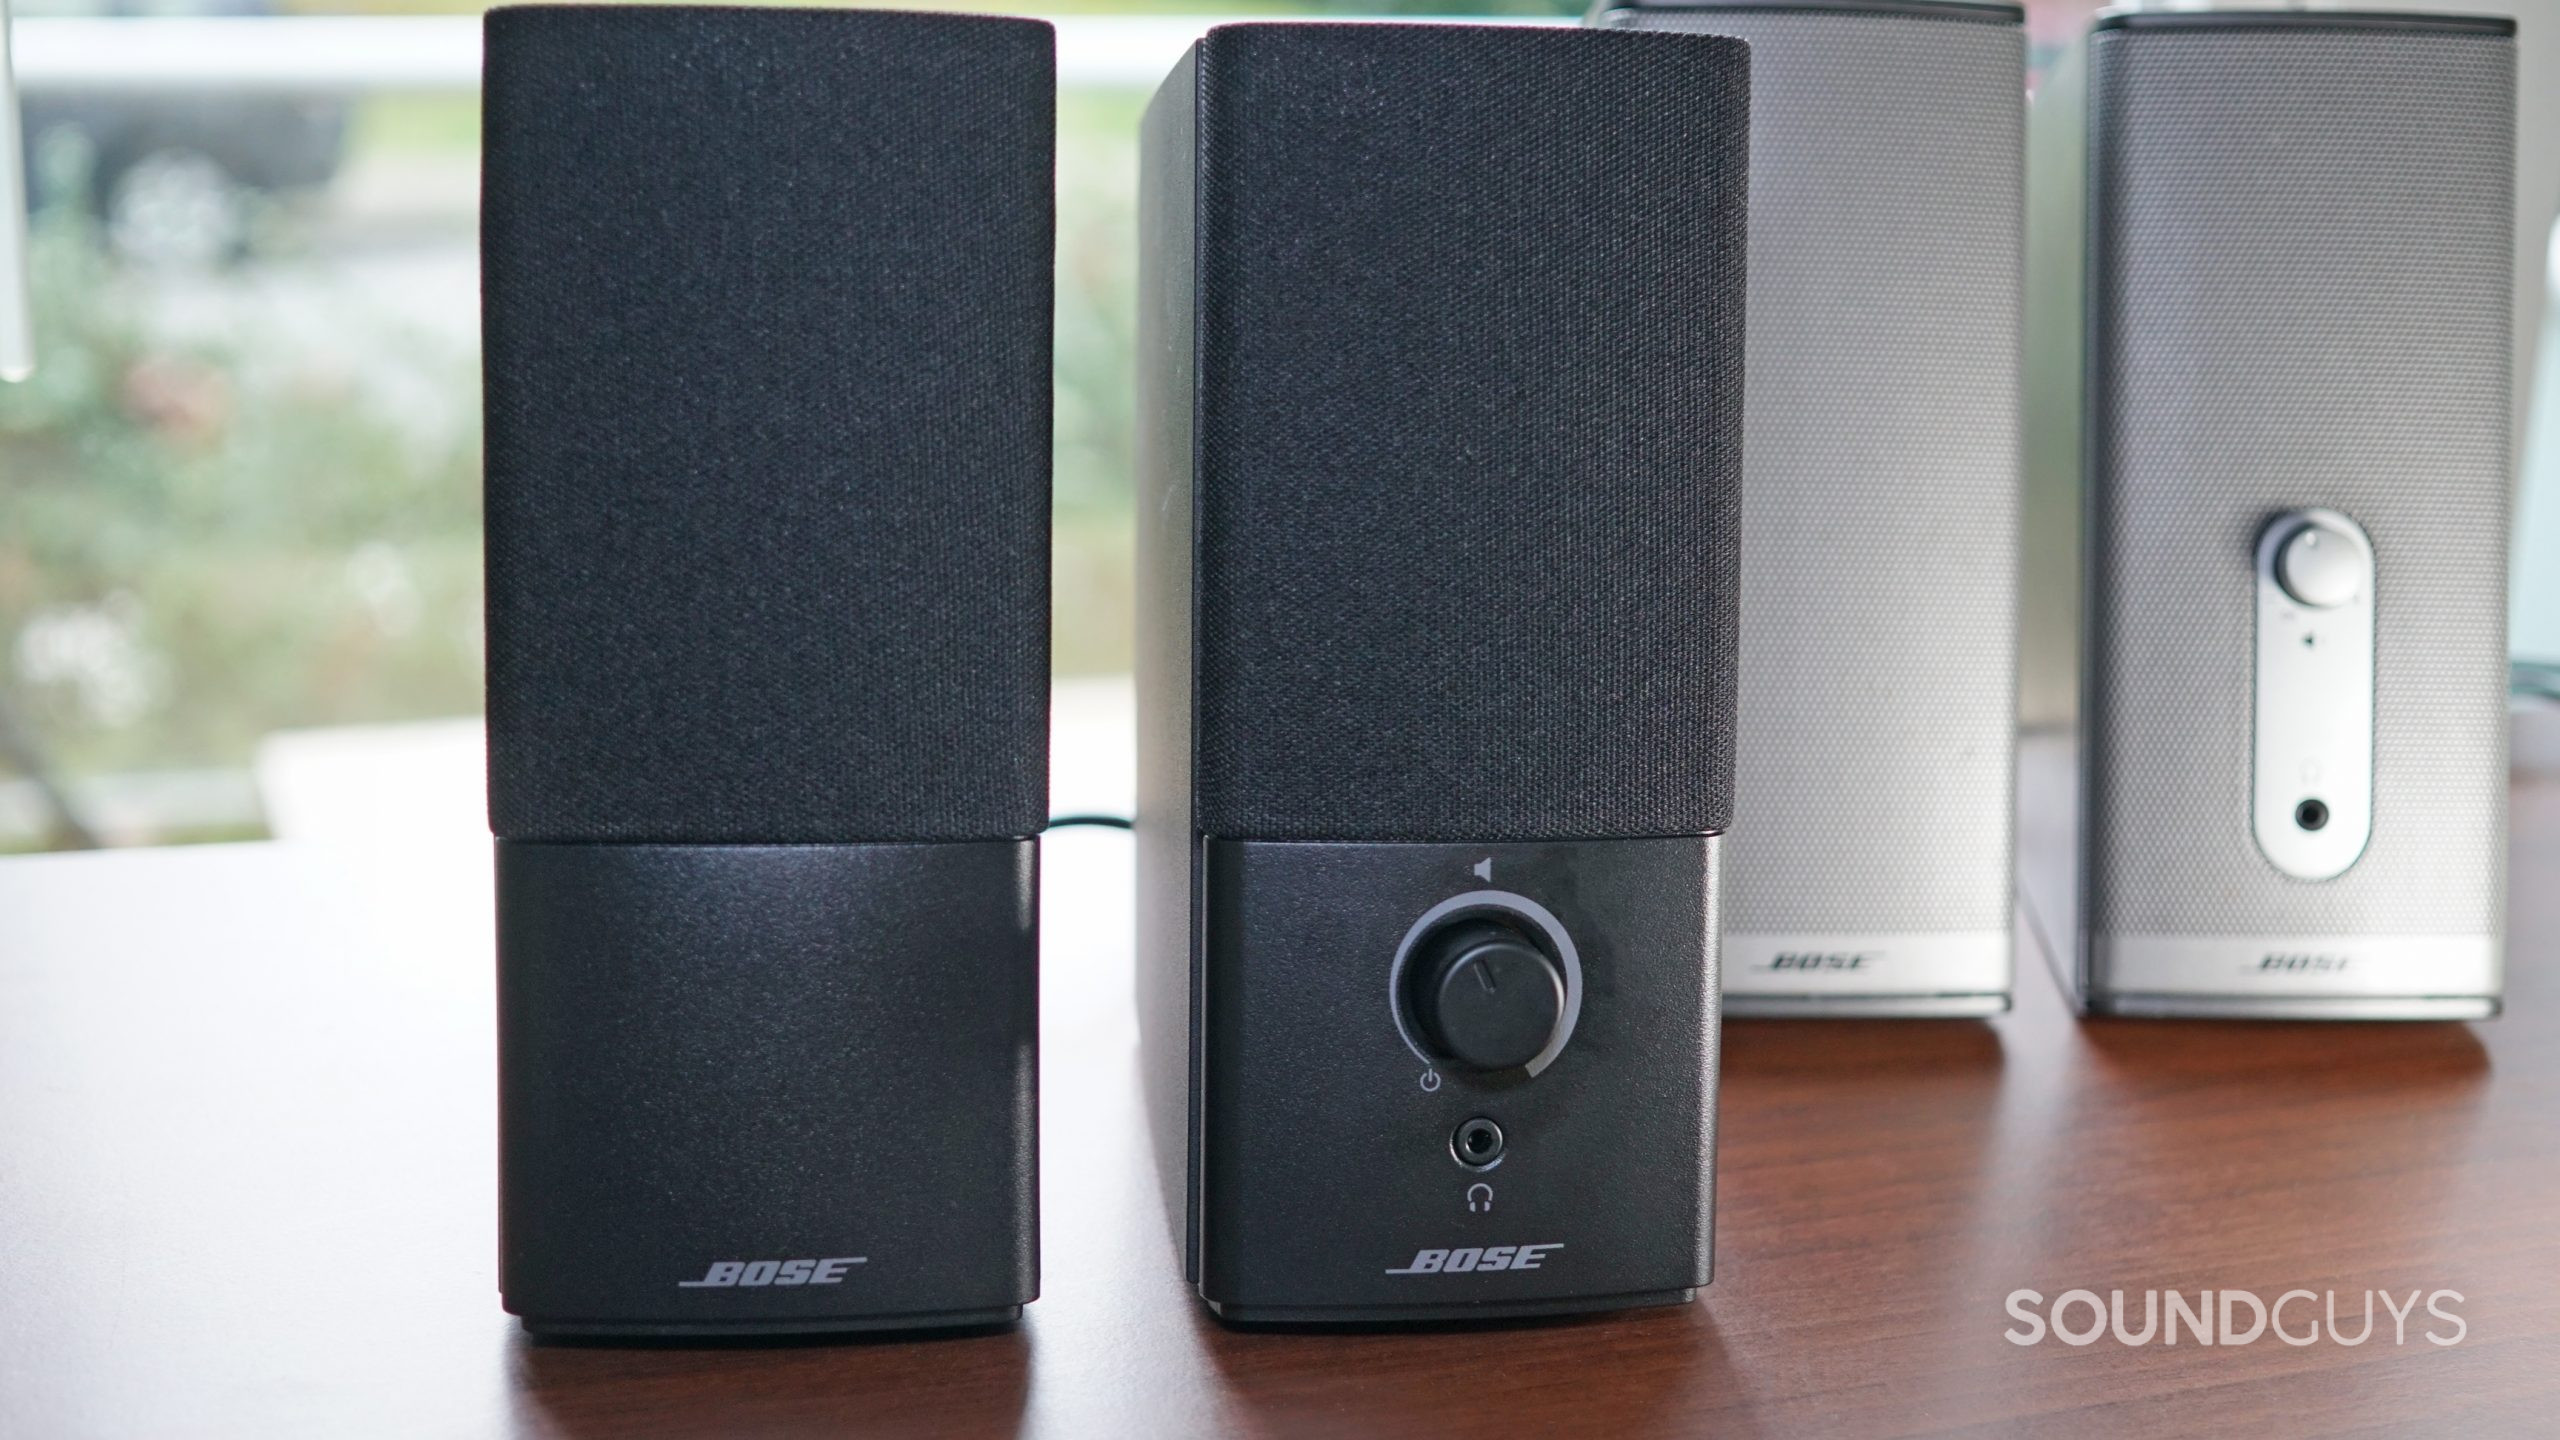 The Bose Companion 2 Series III sits next to the Bose Companion 2 Series II speakers on a wooden surface.